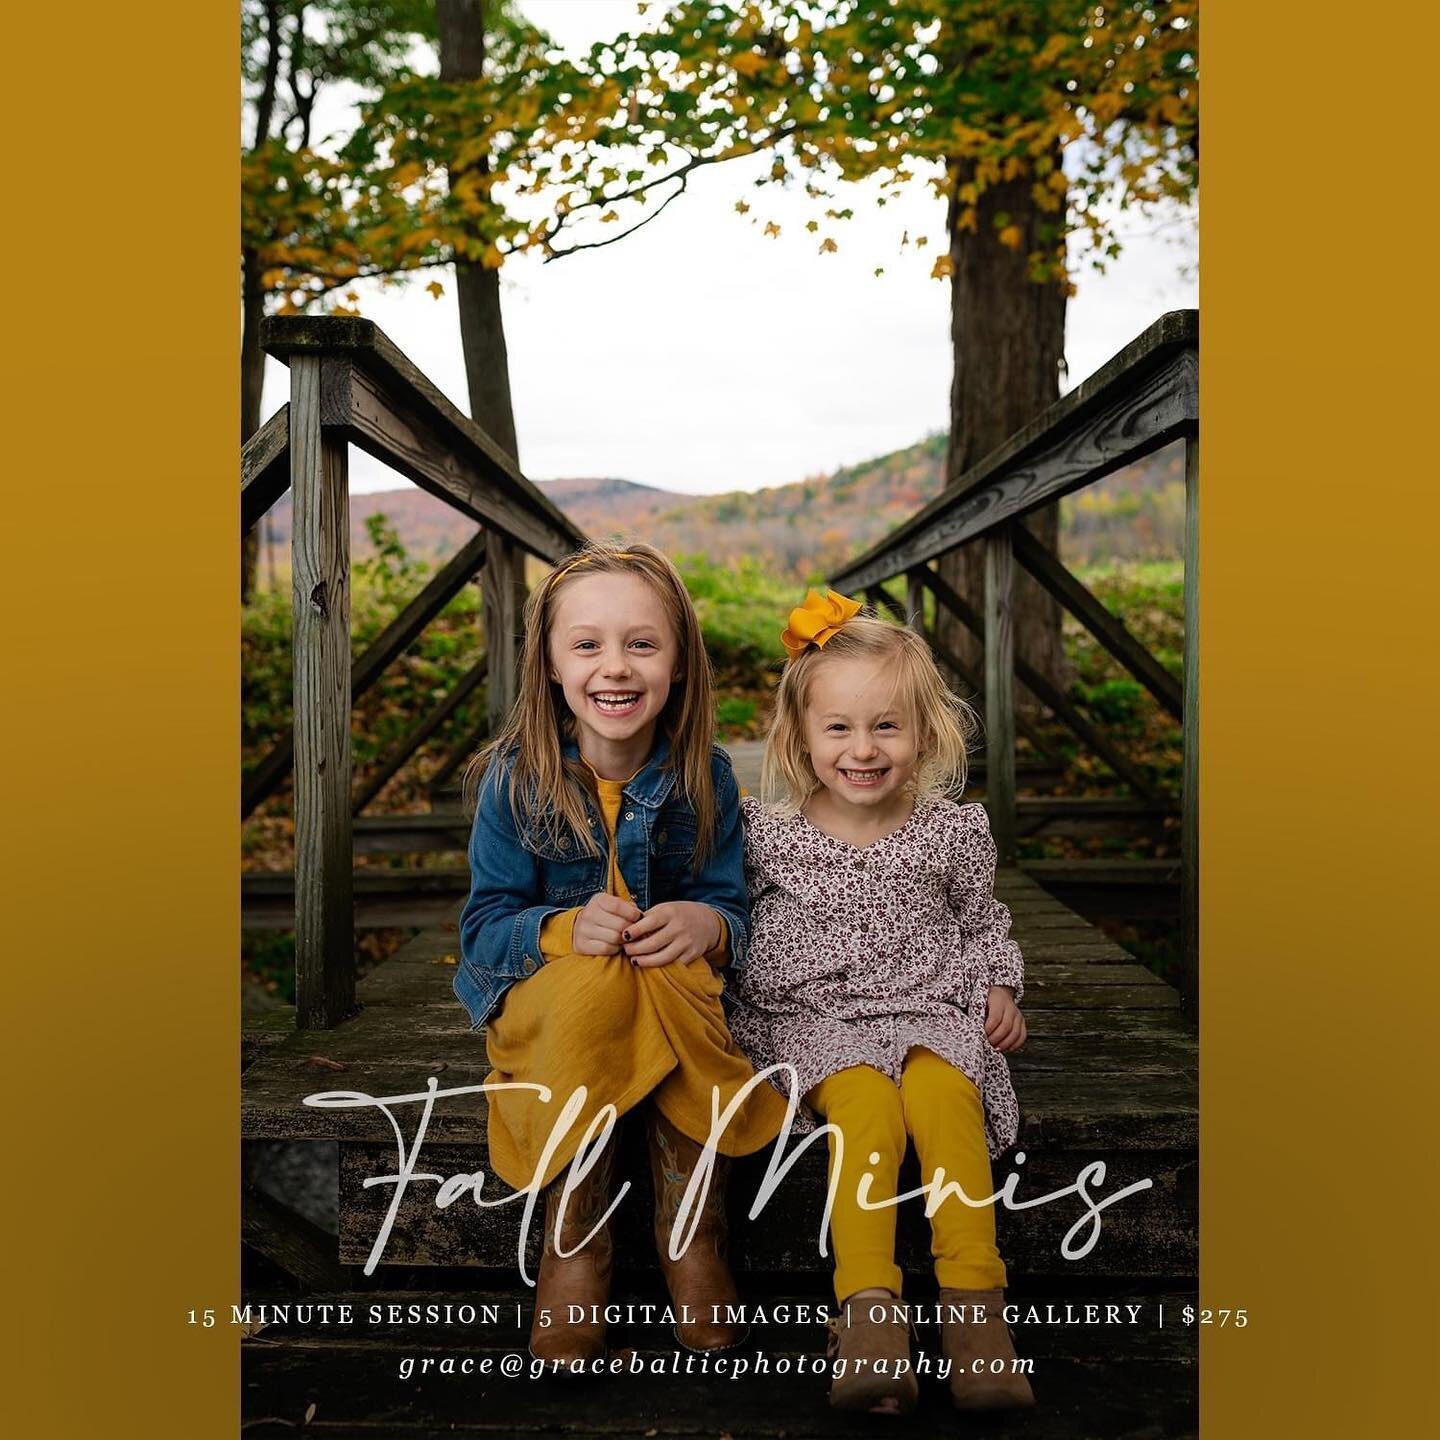 Fall Mini Sessions are here, finally! The available dates for these quick, fun photo sessions are:
Tuesday, 9/27
Saturday, 10/1
Sunday, 10/2
Thursday, 10/6
They are 15 minutes long, include 5 digital photos for download, and are priced at $275.
Messa